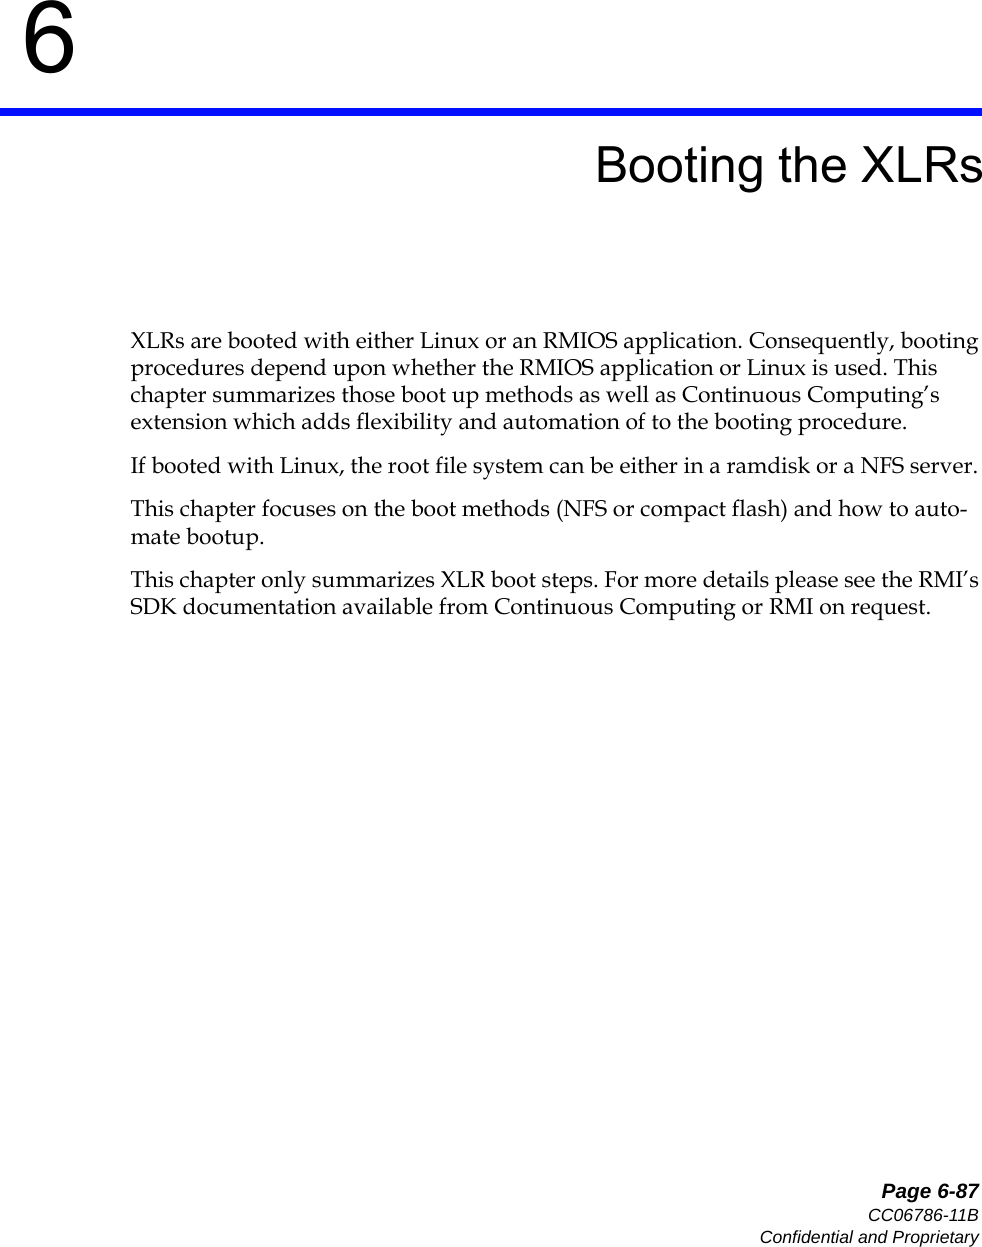   Page 6-87CC06786-11BConfidential and Proprietary6Preliminary6Booting the XLRsXLRs are booted with either Linux or an RMIOS application. Consequently, booting procedures depend upon whether the RMIOS application or Linux is used. This chapter summarizes those boot up methods as well as Continuous Computing’s extension which adds flexibility and automation of to the booting procedure. If booted with Linux, the root file system can be either in a ramdisk or a NFS server. This chapter focuses on the boot methods (NFS or compact flash) and how to auto-mate bootup. This chapter only summarizes XLR boot steps. For more details please see the RMI’s SDK documentation available from Continuous Computing or RMI on request.